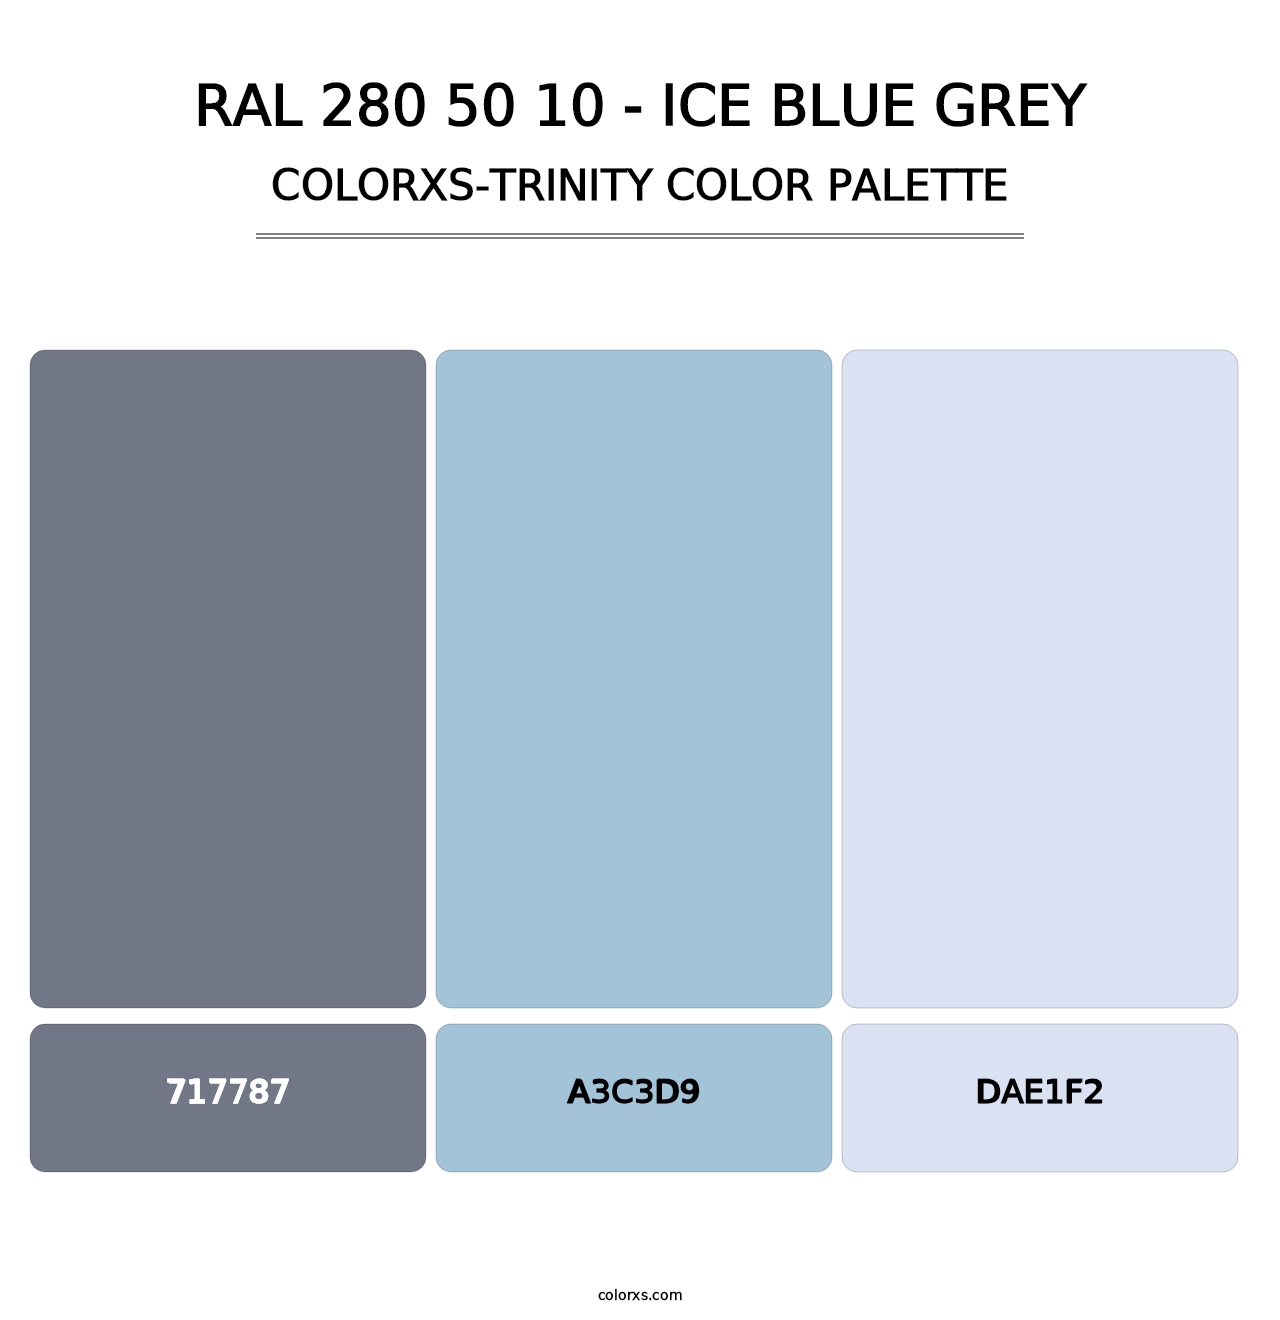 RAL 280 50 10 - Ice Blue Grey - Colorxs Trinity Palette